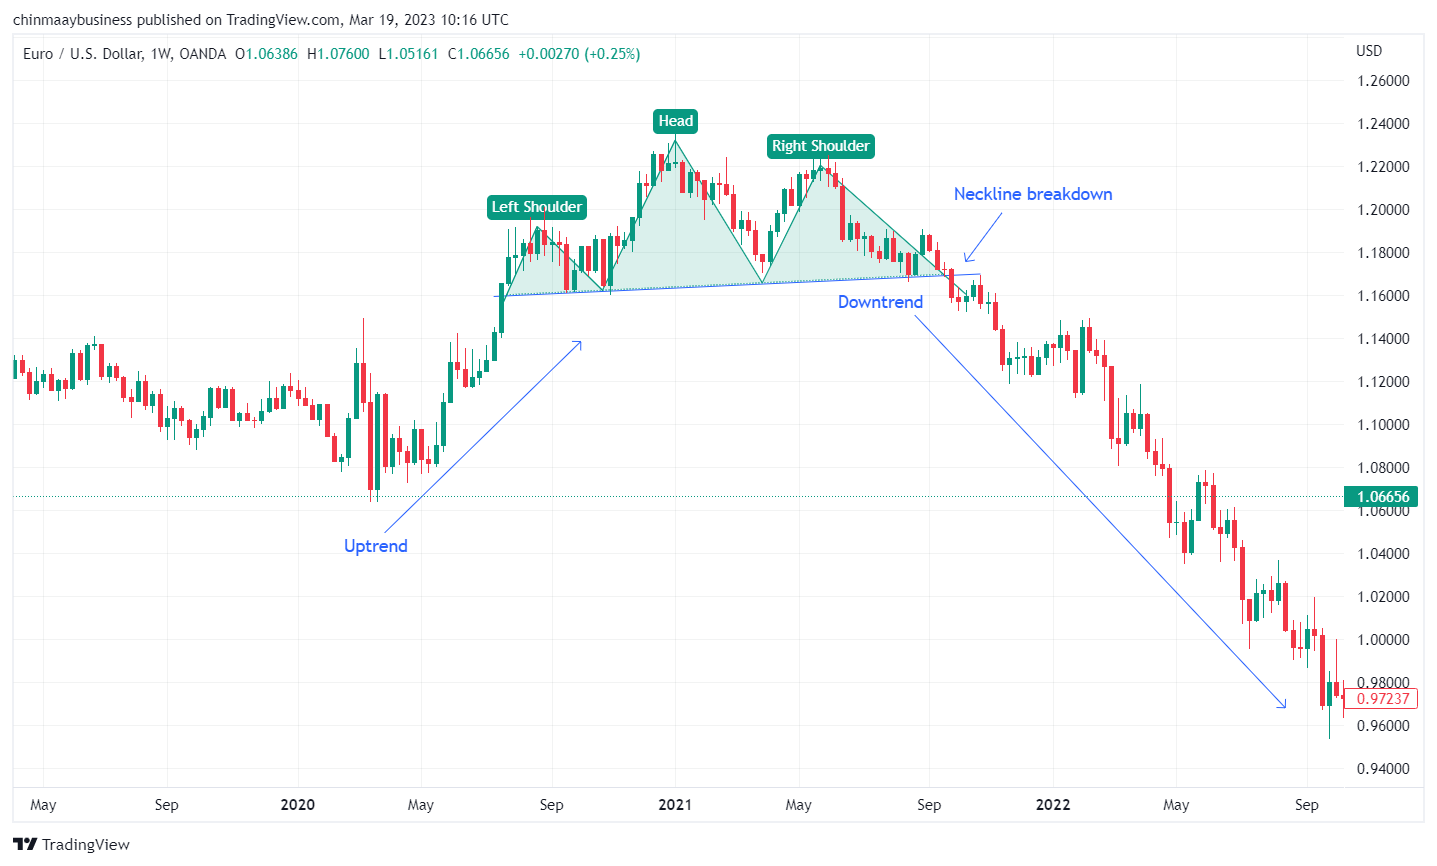 Head and Shoulders pattern strategy